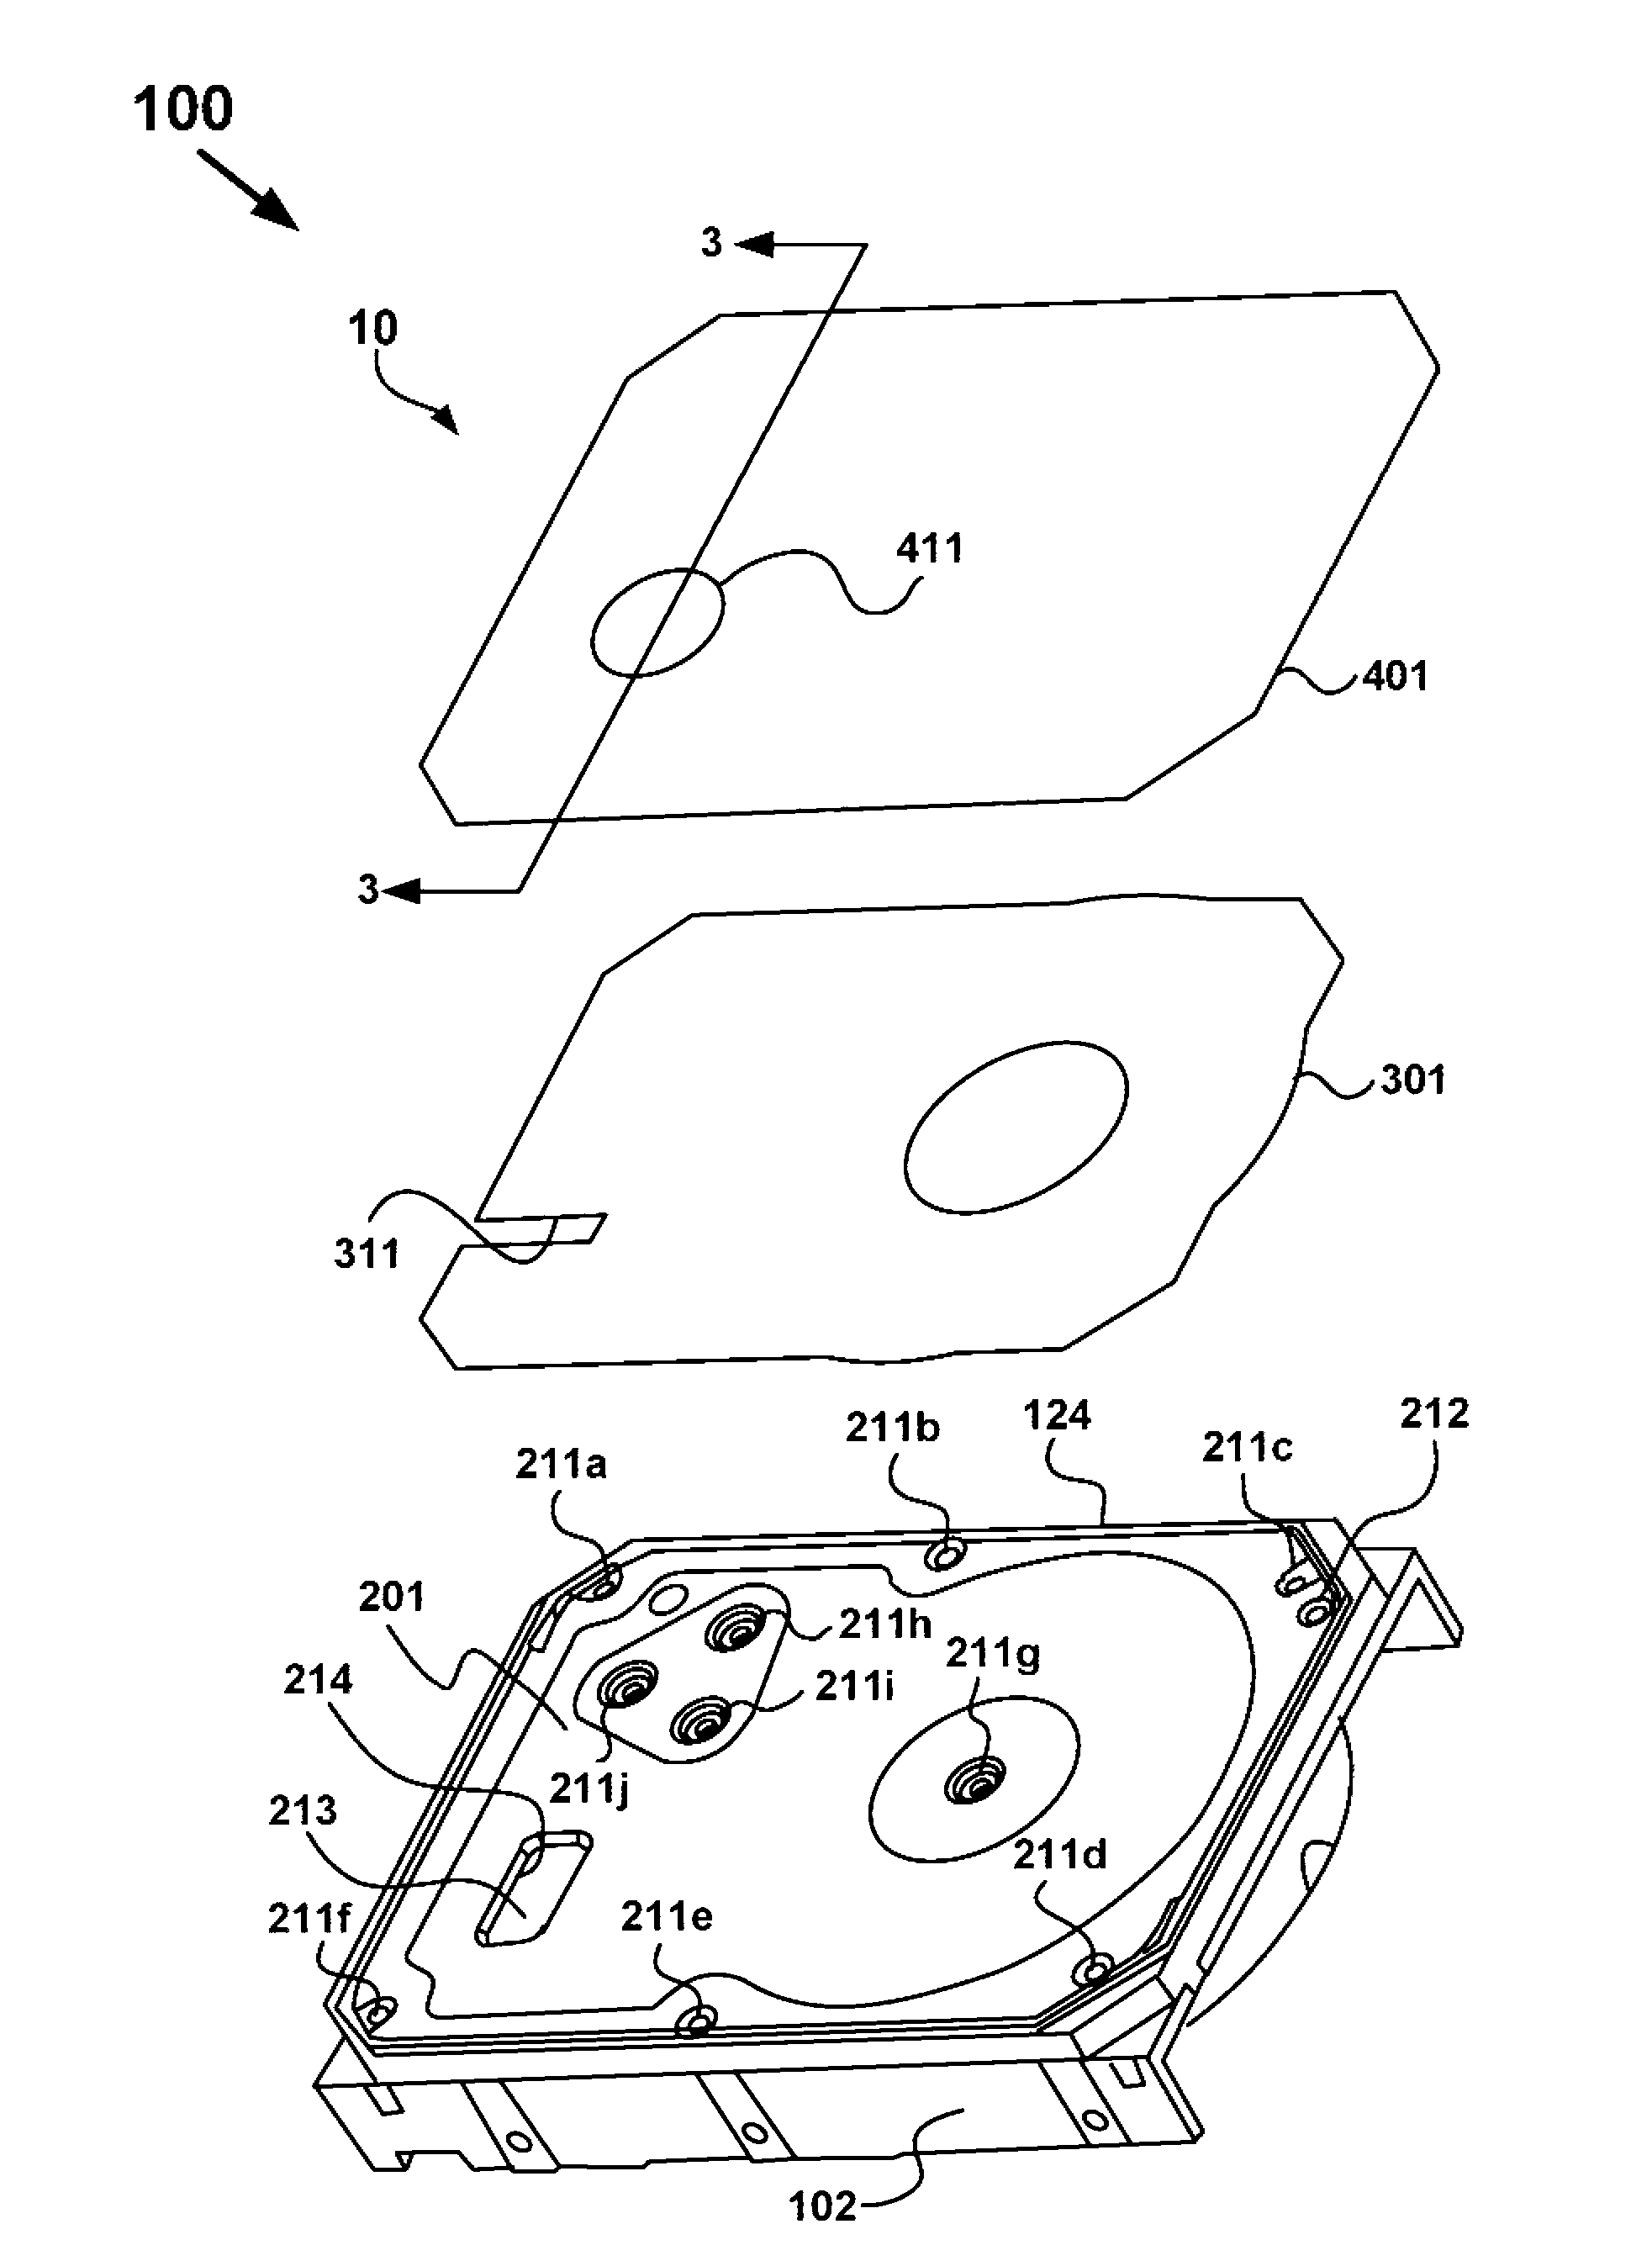 Hermetically resealable hard-disk drive configured for recharging with a low-density gas